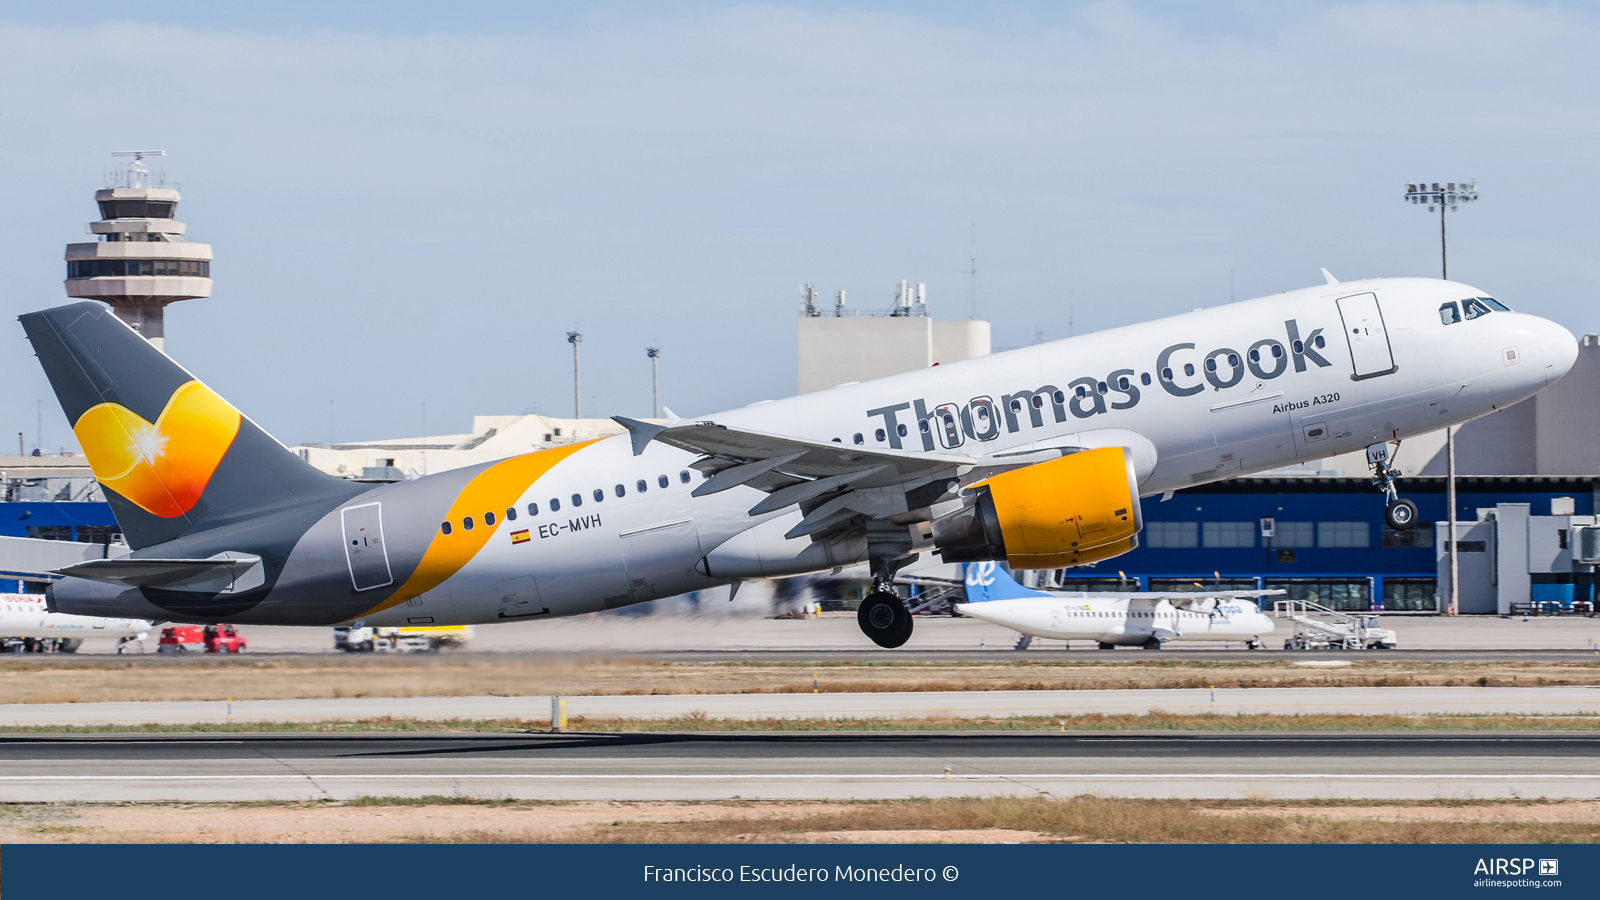 Thomas Cook Airlines  Airbus A320  EC-MVH